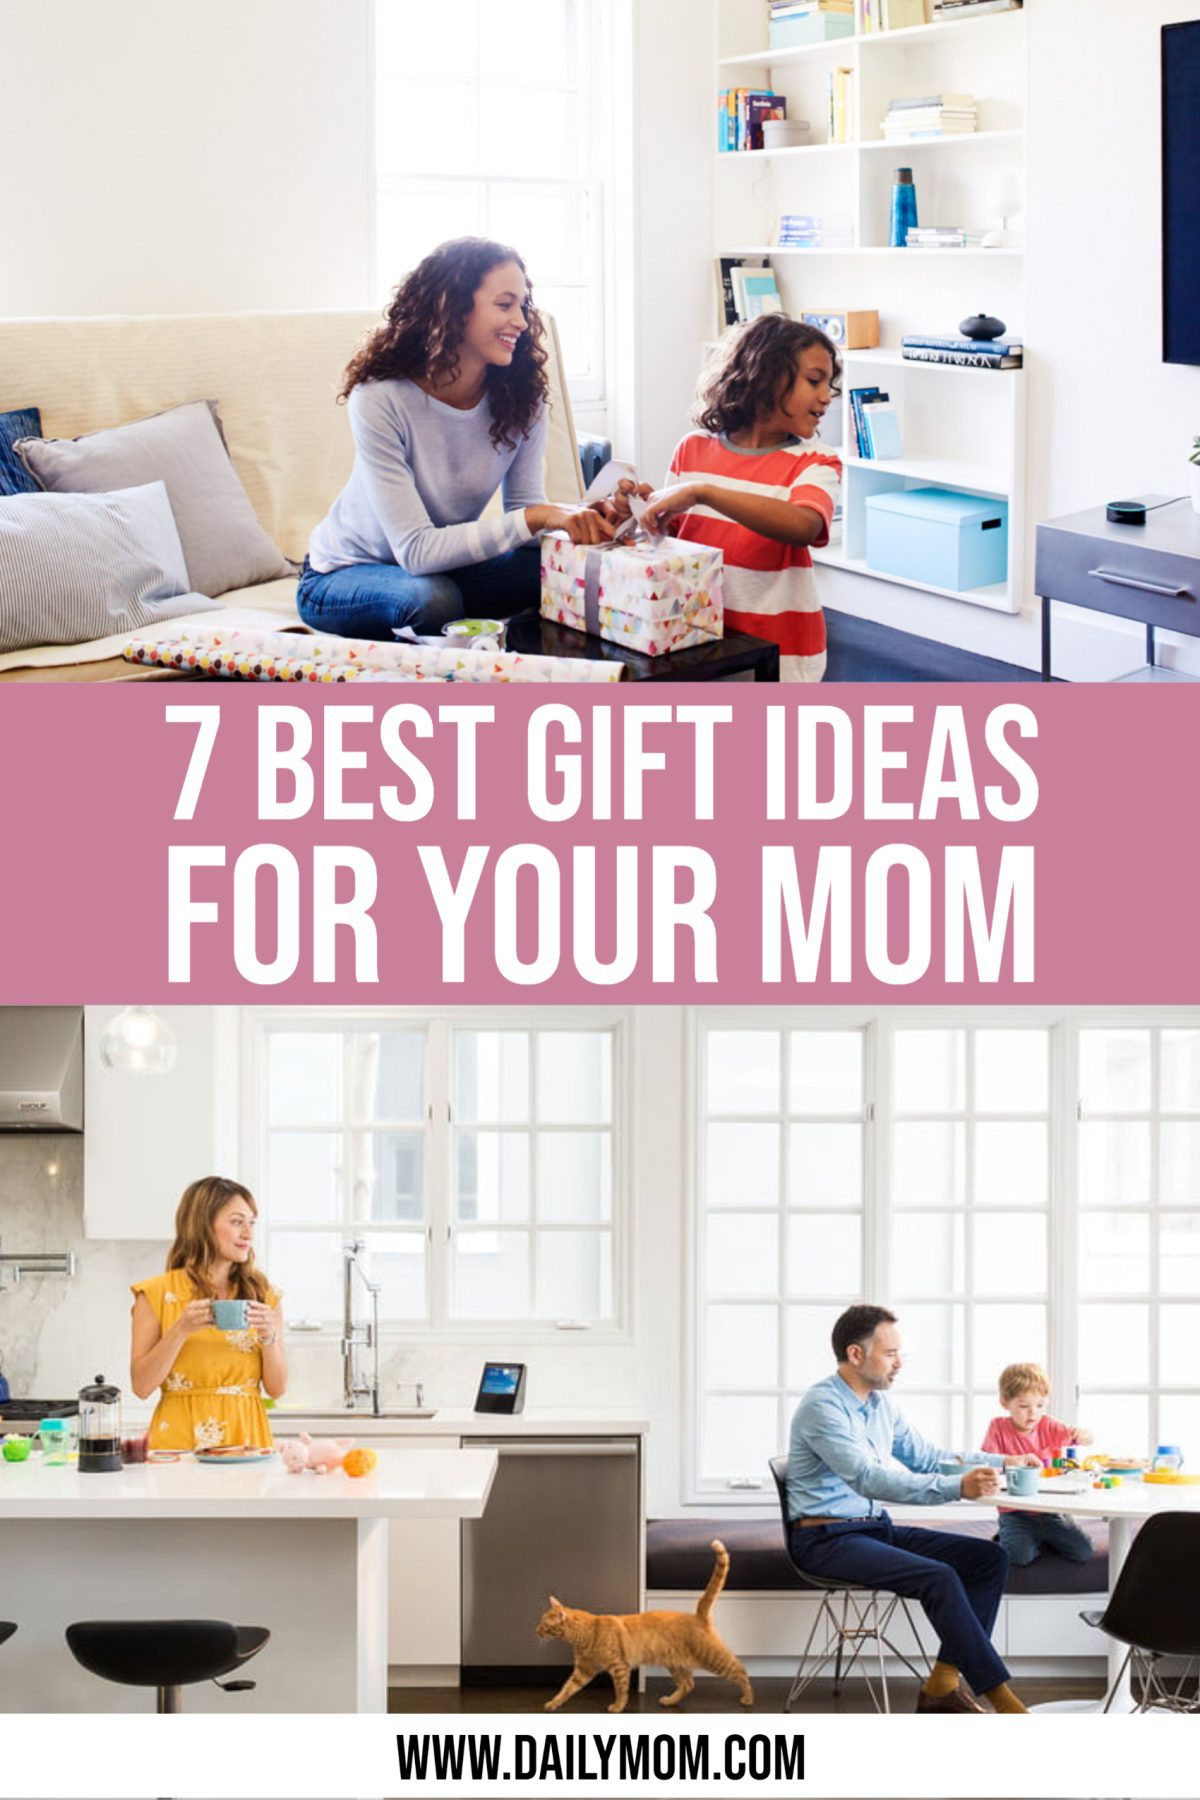 7 Best Gift Ideas For Your Mom